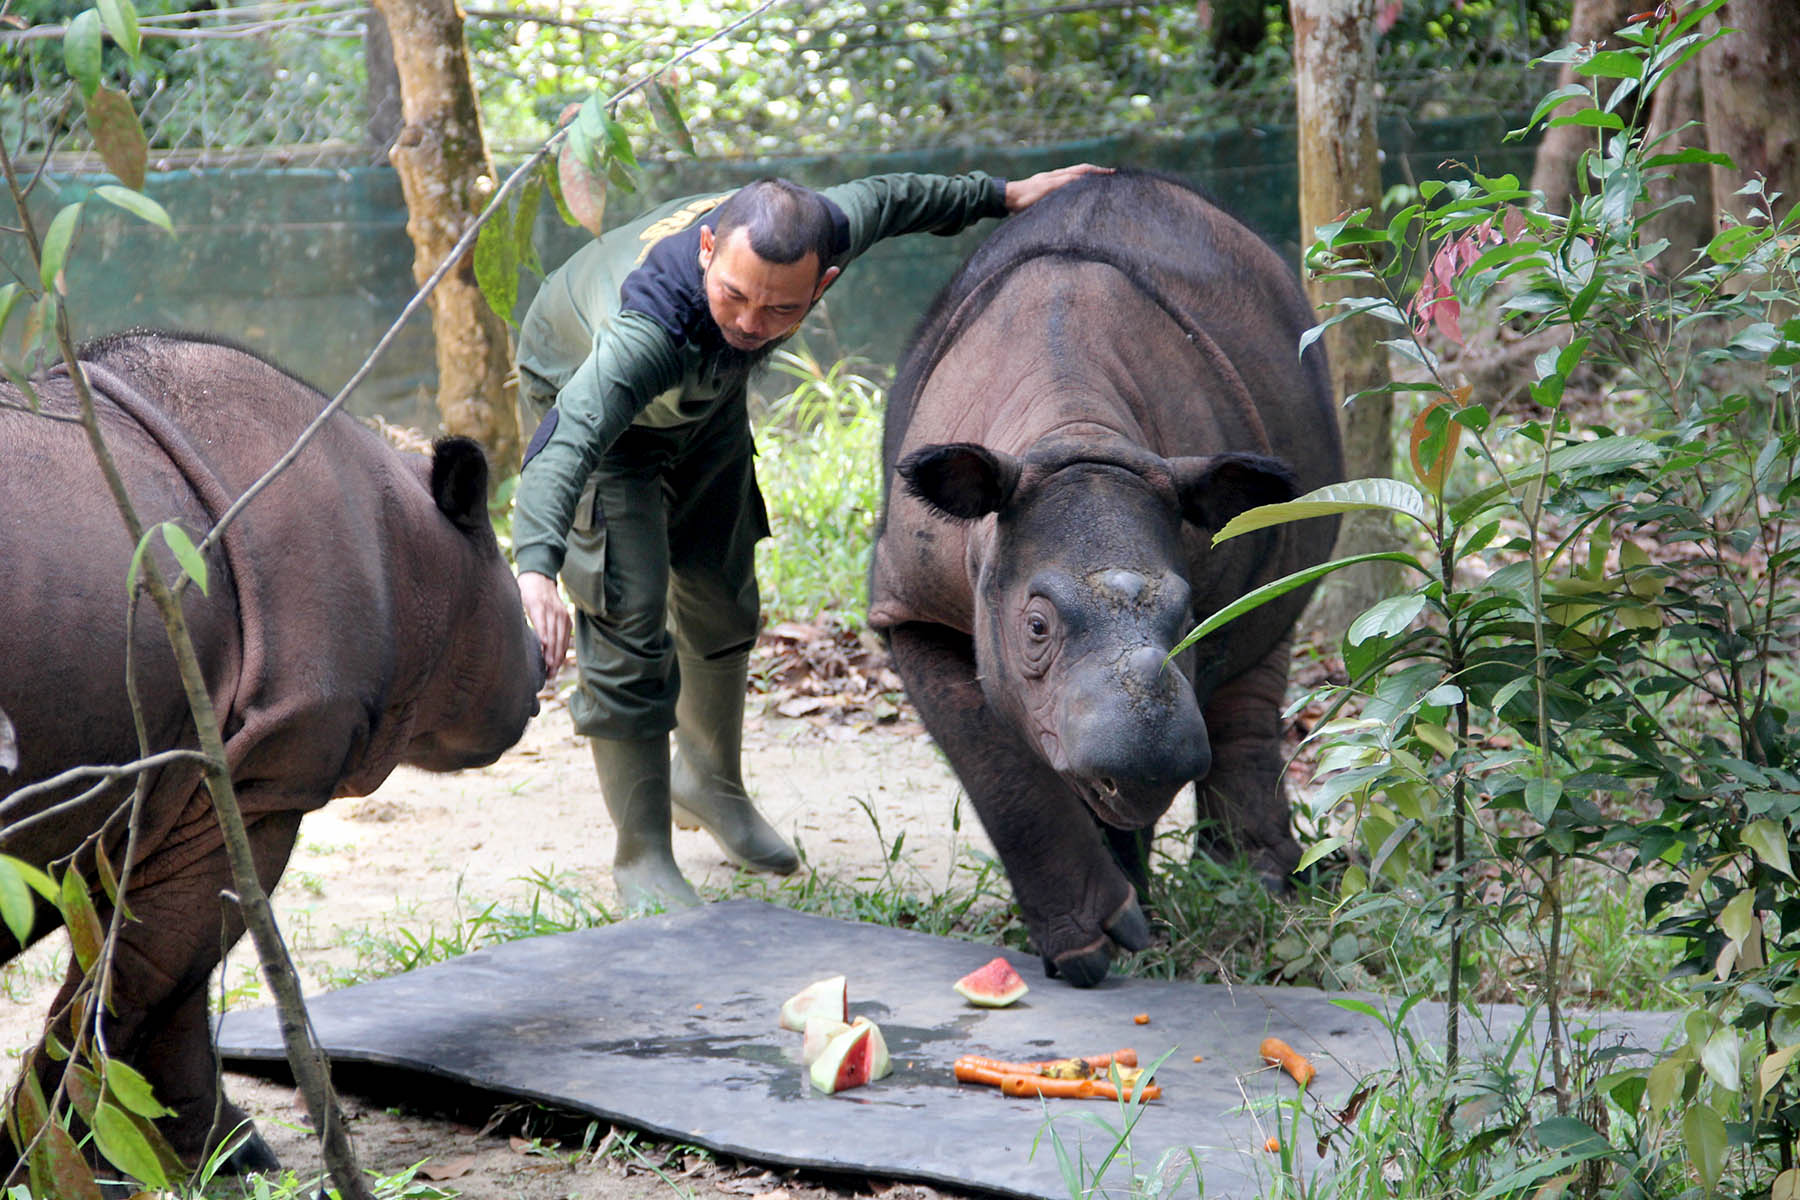 Two-year-old Delilah, right, is currently the youngest Sumatran rhino and only the second in recent years to have been born in captivity; in Javanese, her name means “God’s Blessing.” Working with her and her mother, Ratu, left, is veterinarian Zulfi Arsan of the Sumatran Rhino Sanctuary (SRS), located in Sumatra’s Way Kambas National Park.